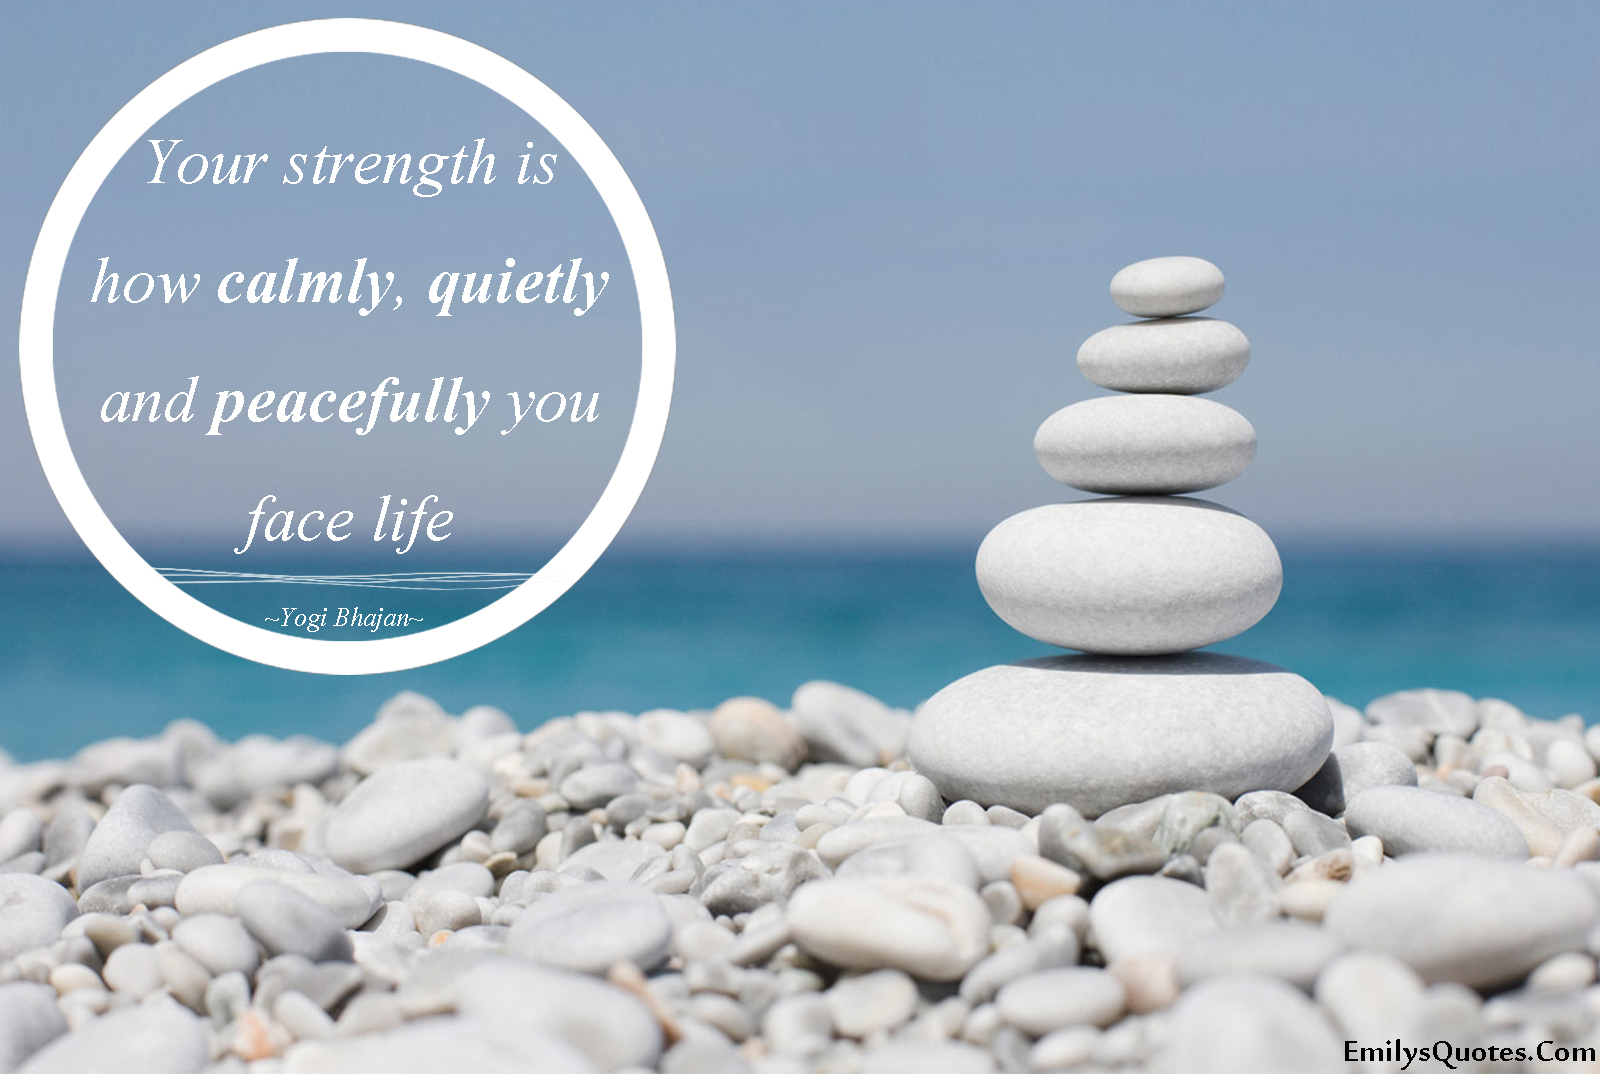 Your strength is how calmly, quietly and peacefully you face life